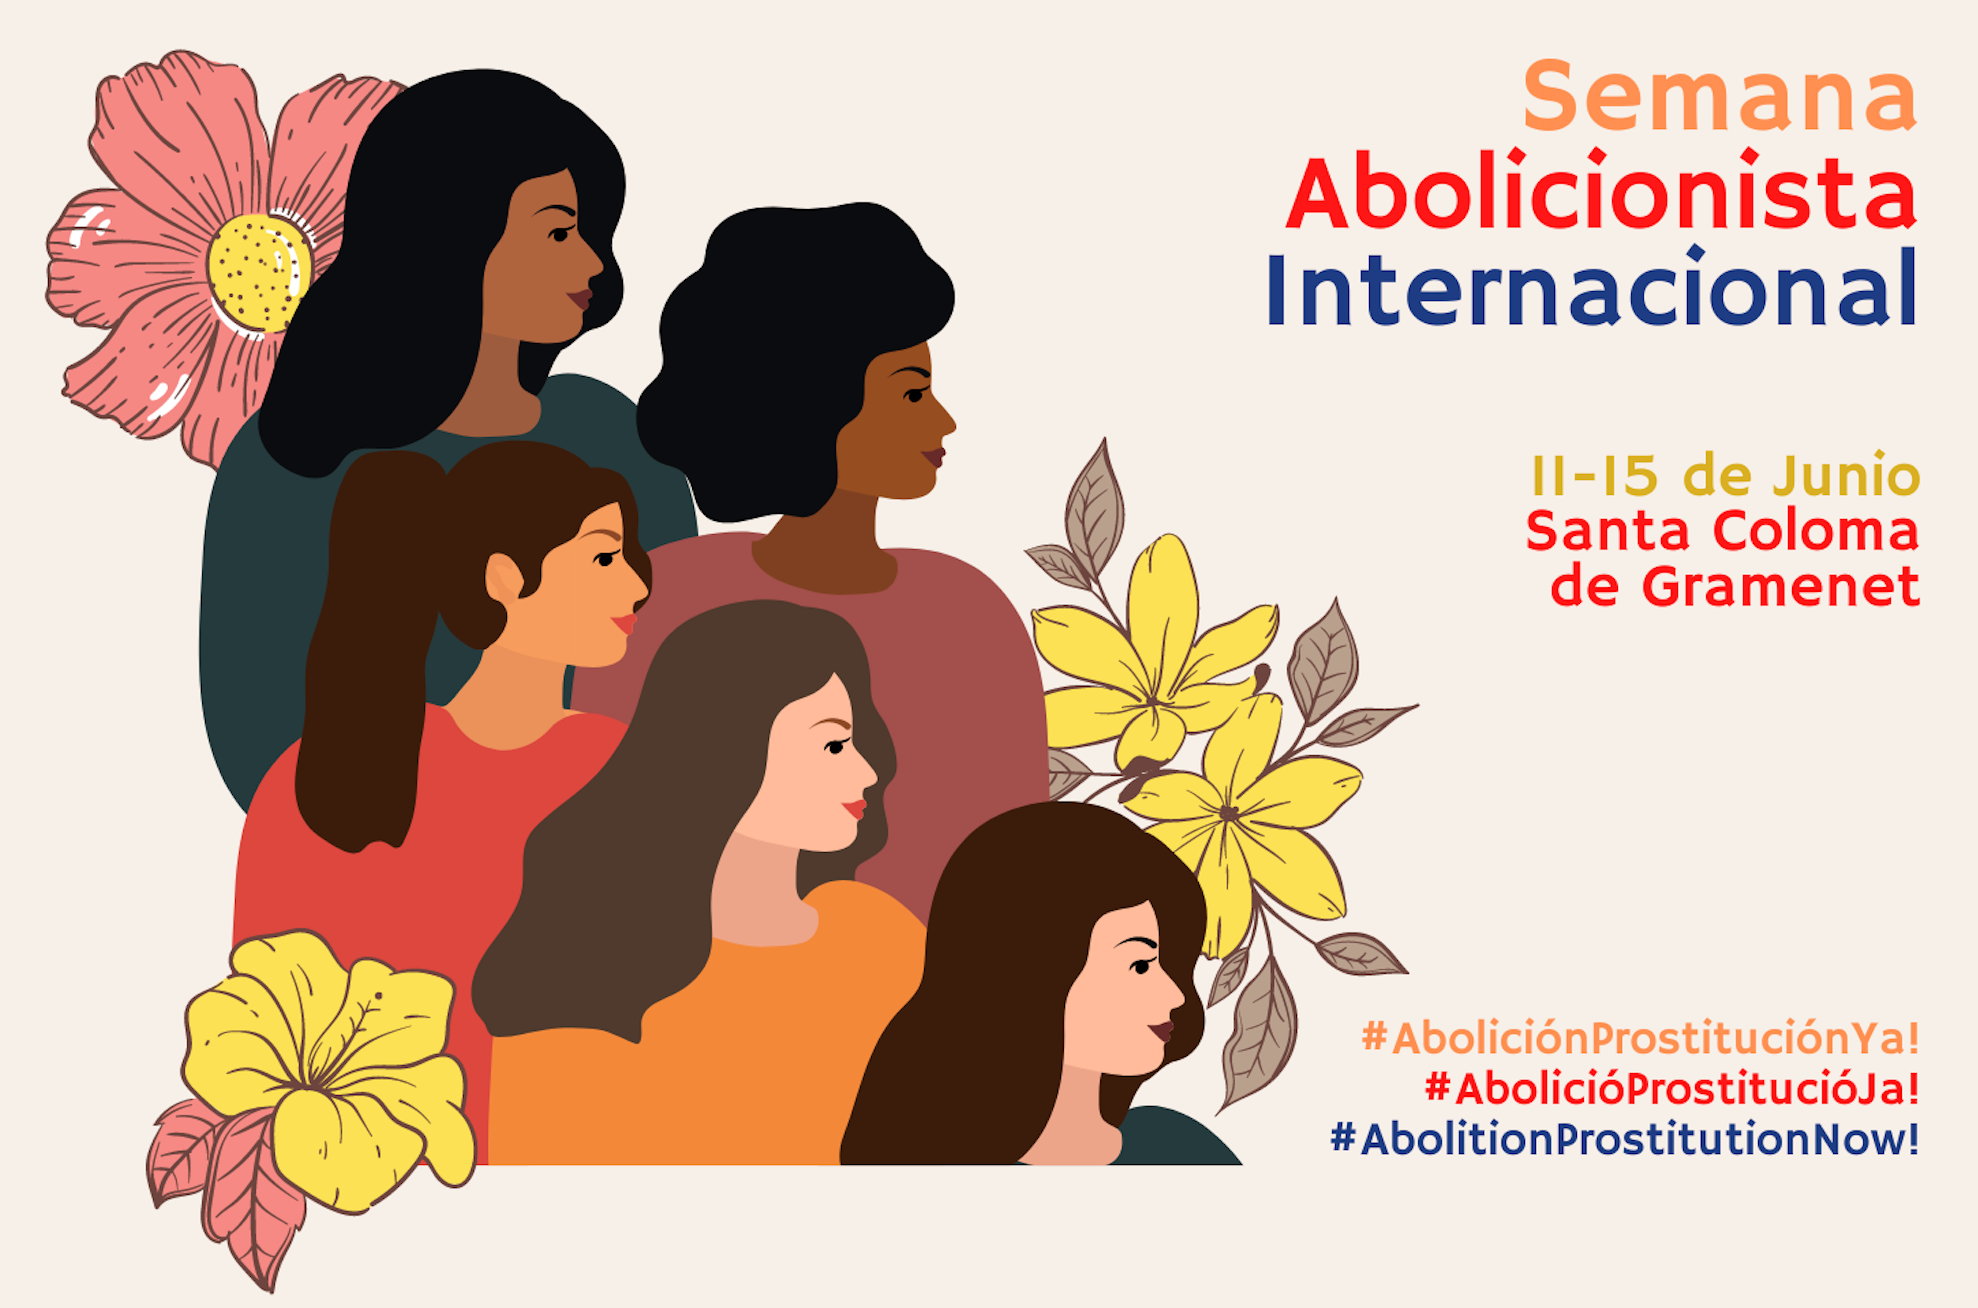 Global leaders and activists gather in Spain for the 2nd International Abolitionist Week